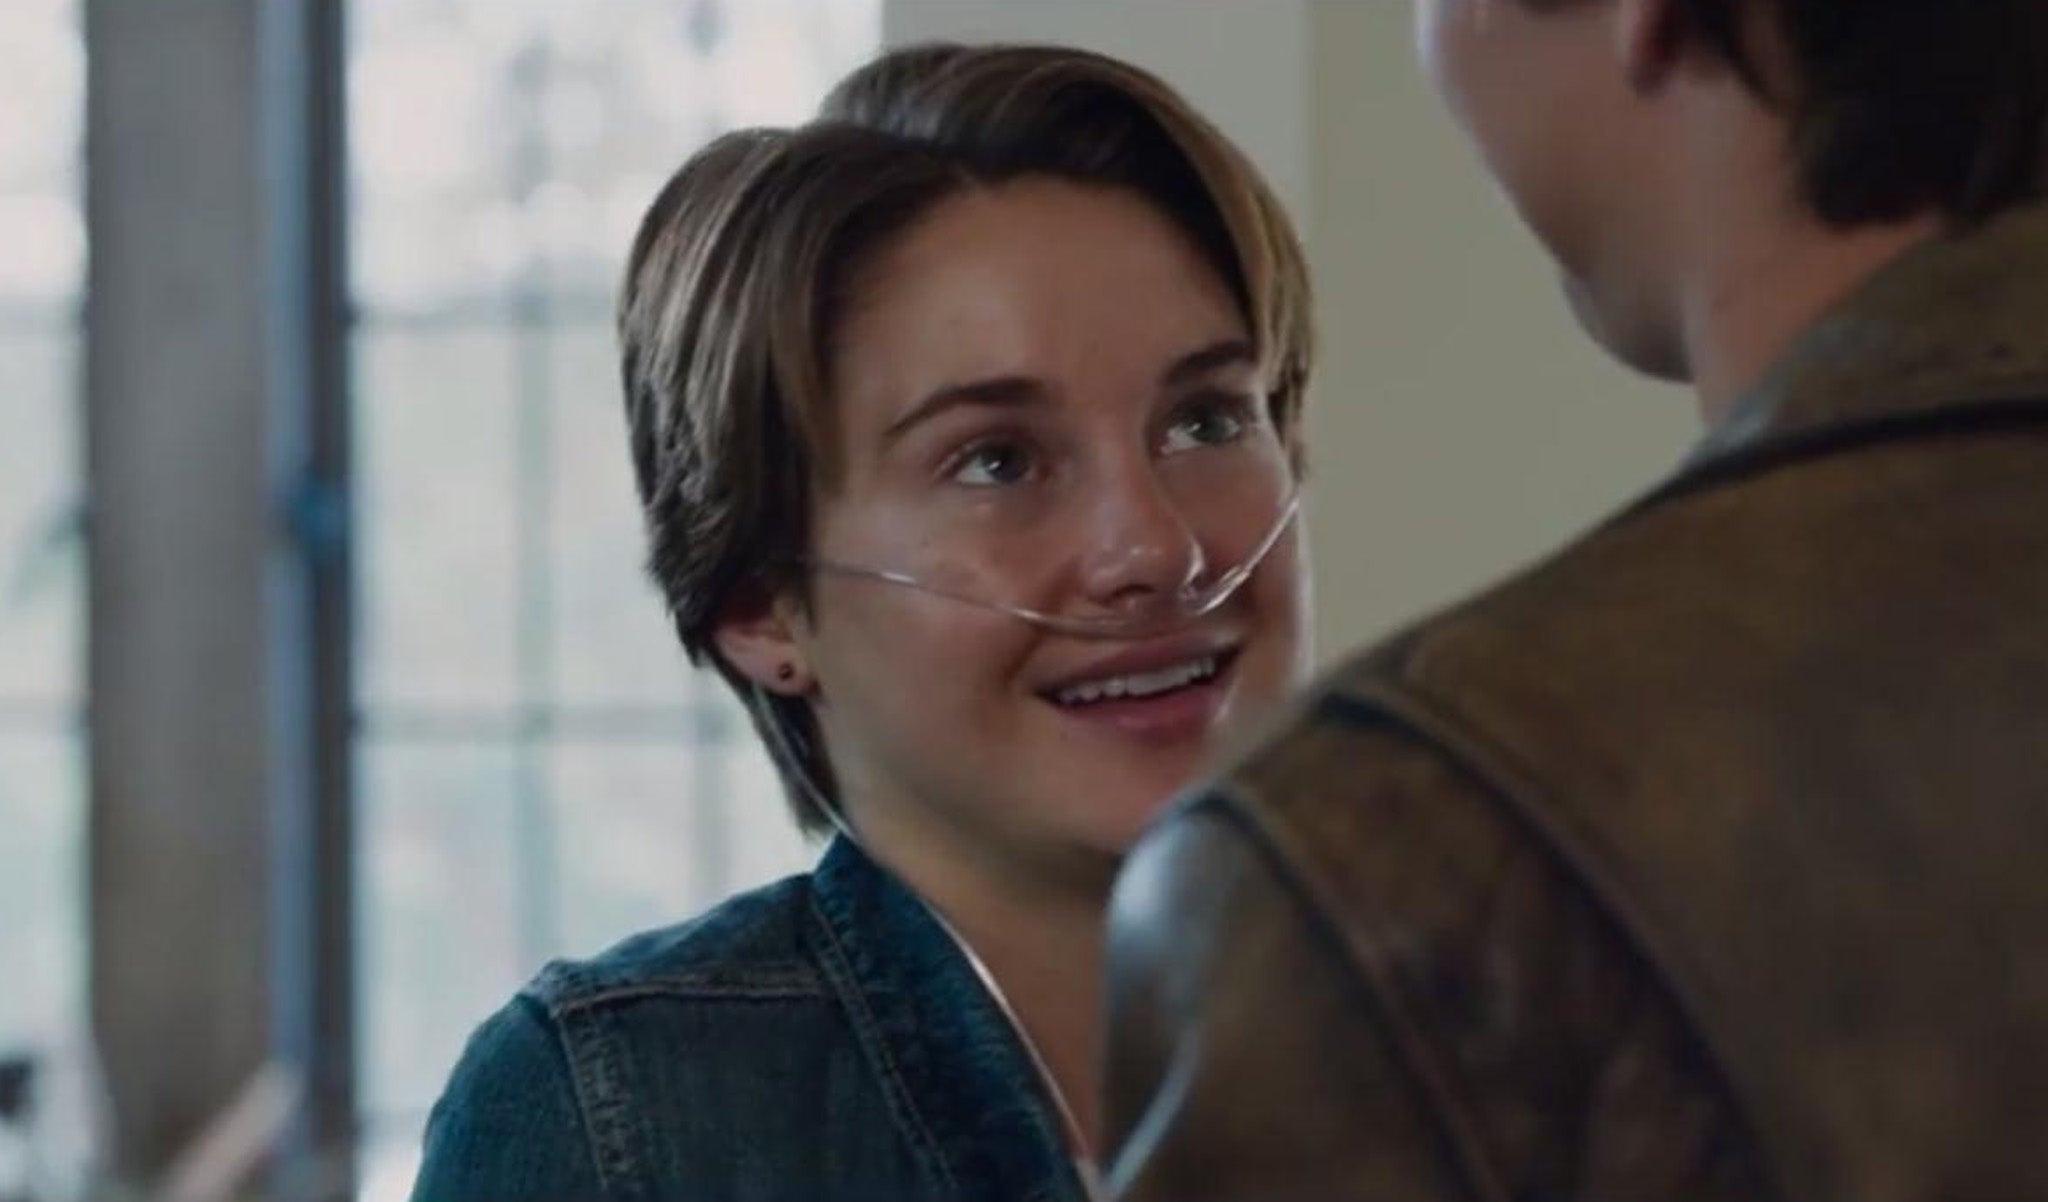 the fault in our stars free book online